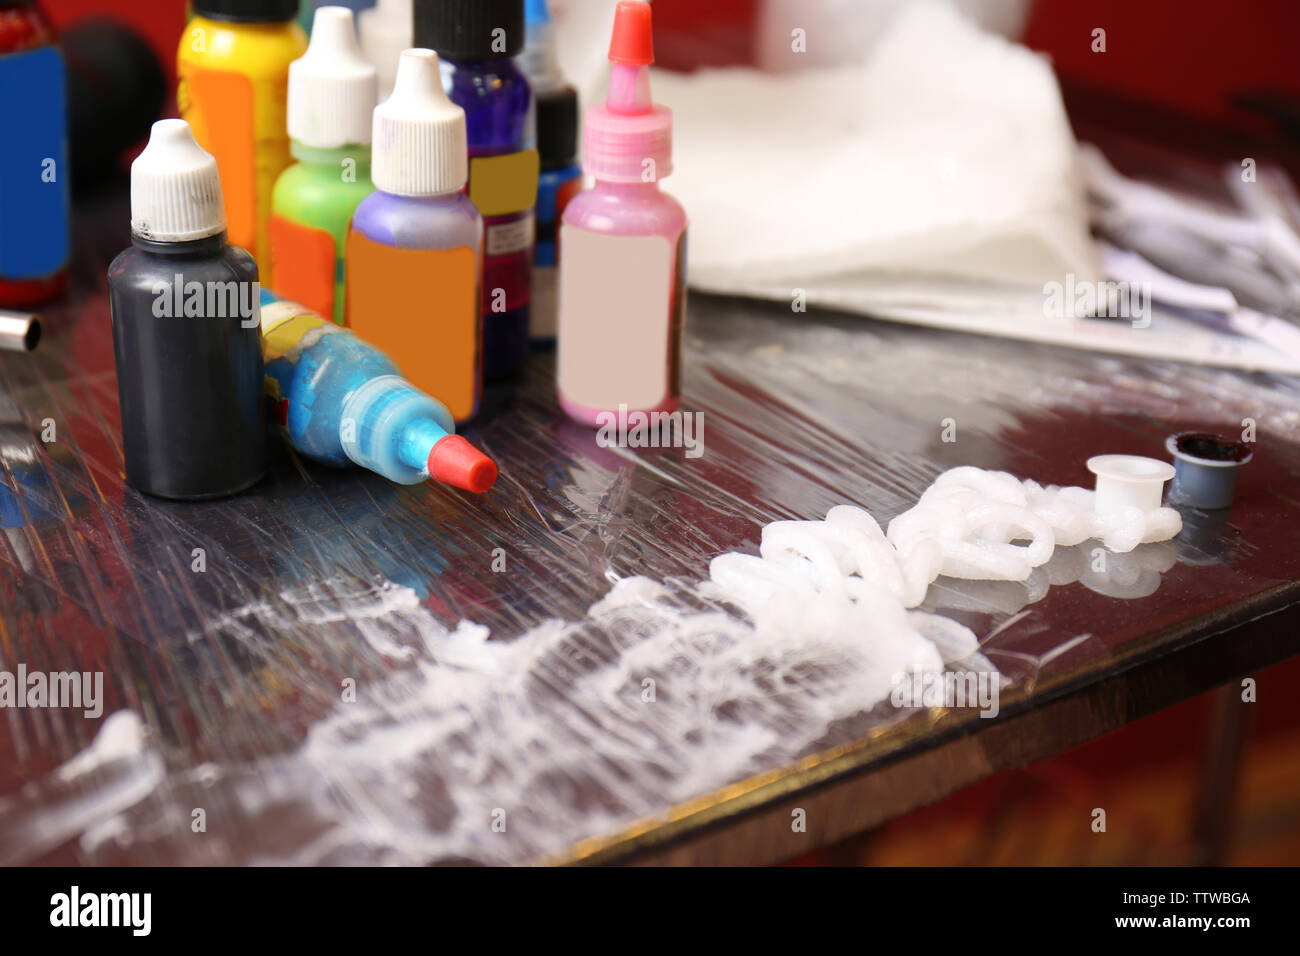 Bottles with tattoo colorful inks and petroleum jelly on wooden table,  close up view Stock Photo - Alamy